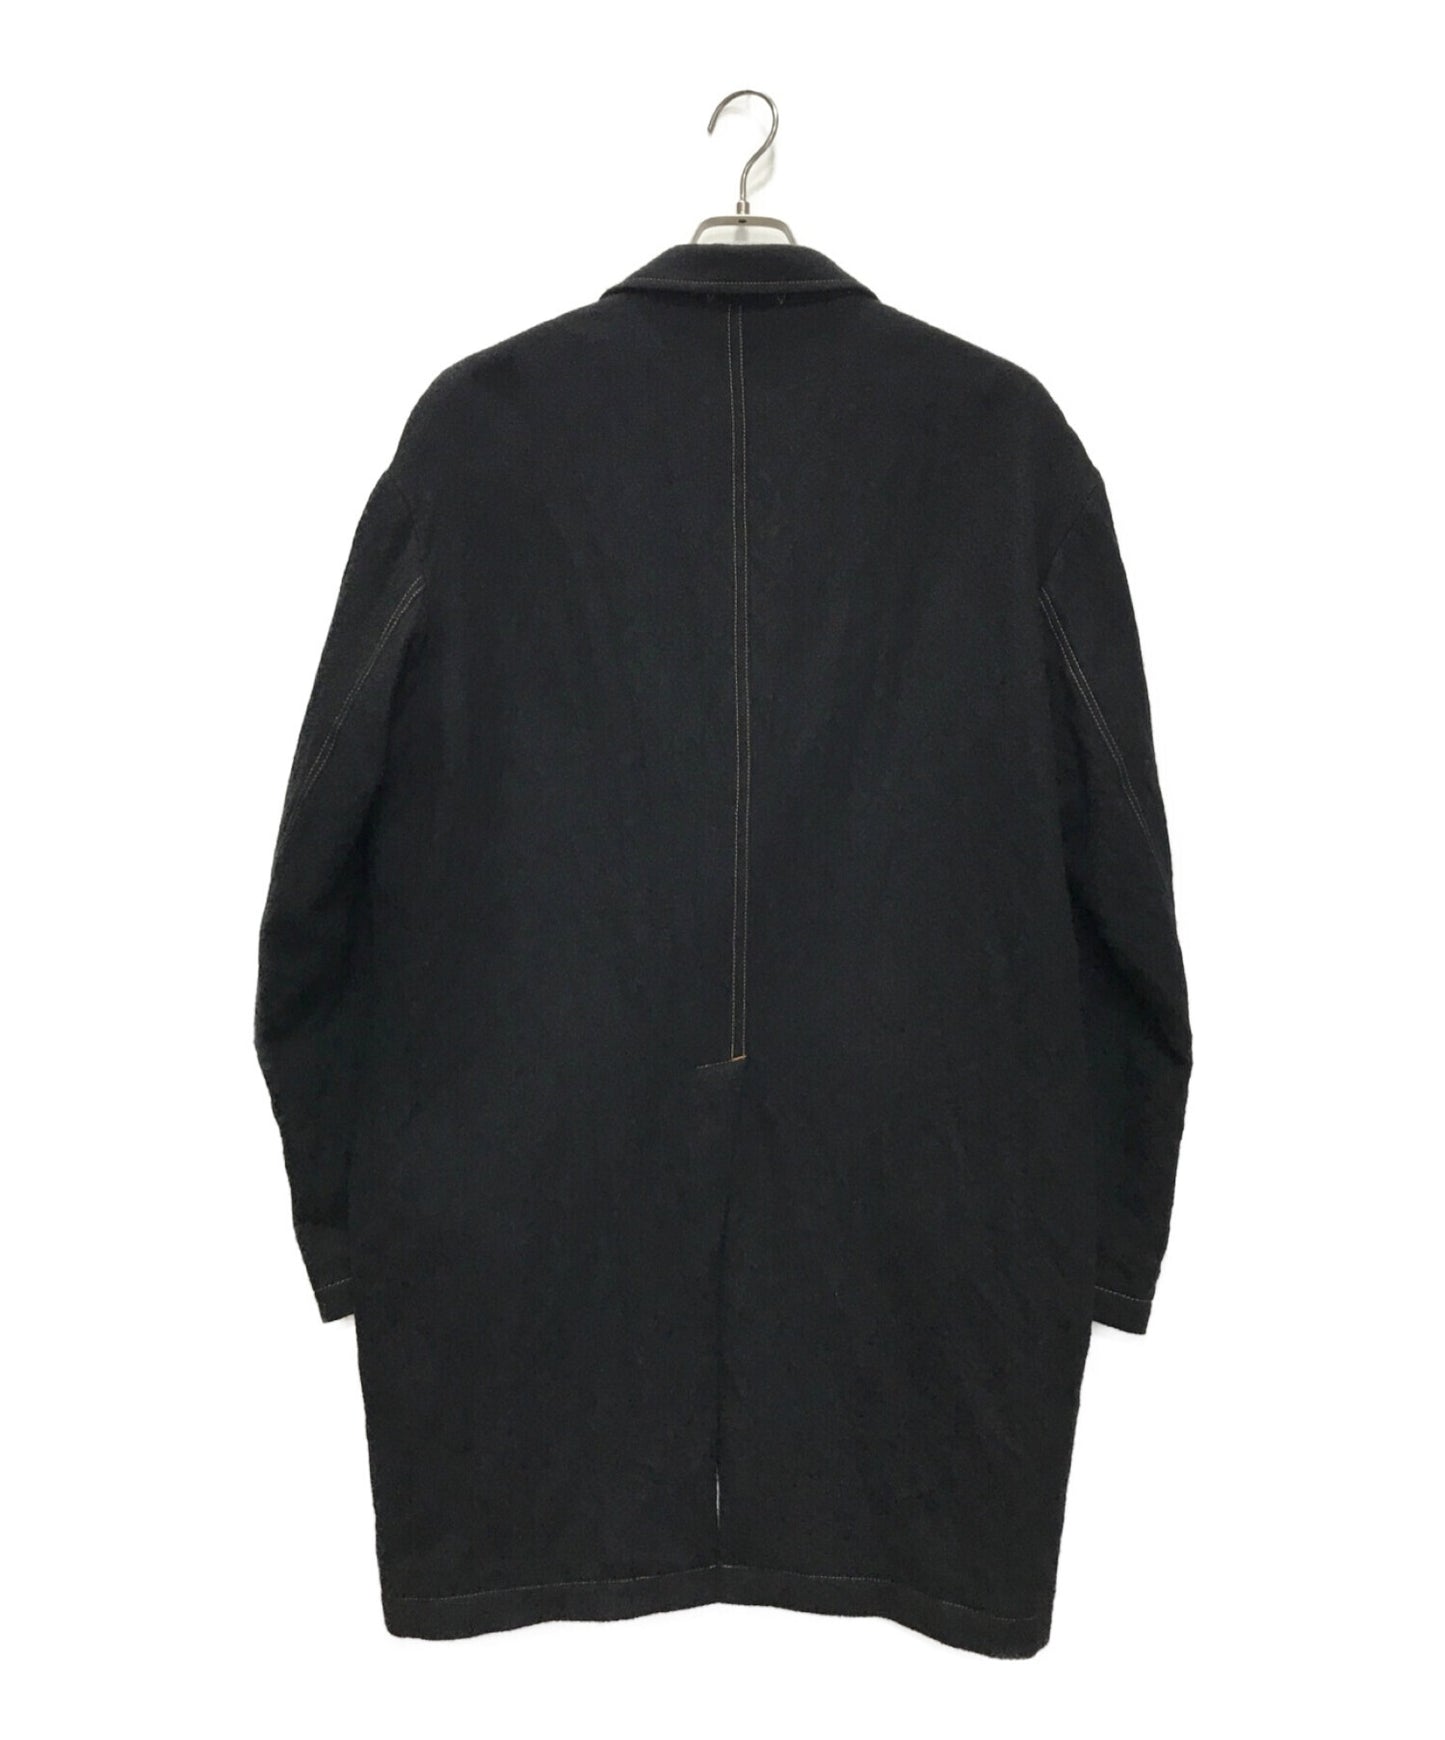 [Pre-owned] Y's oversize coat YX-J01-101